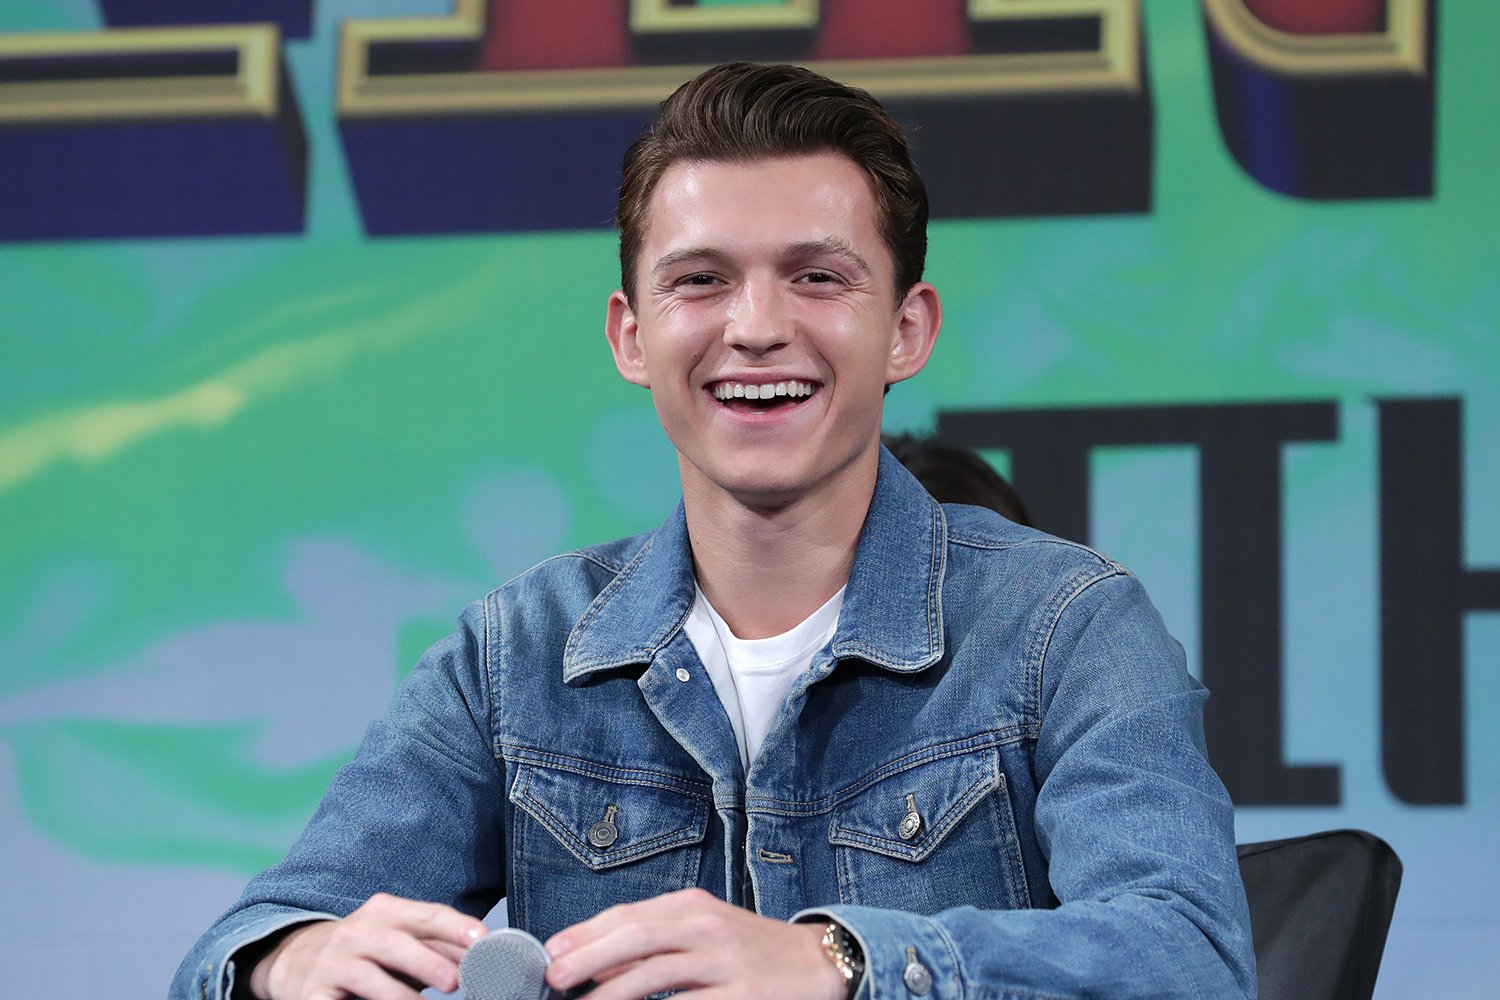 Spider-Man: No Way Home star Tom Holland smiles at a press conference